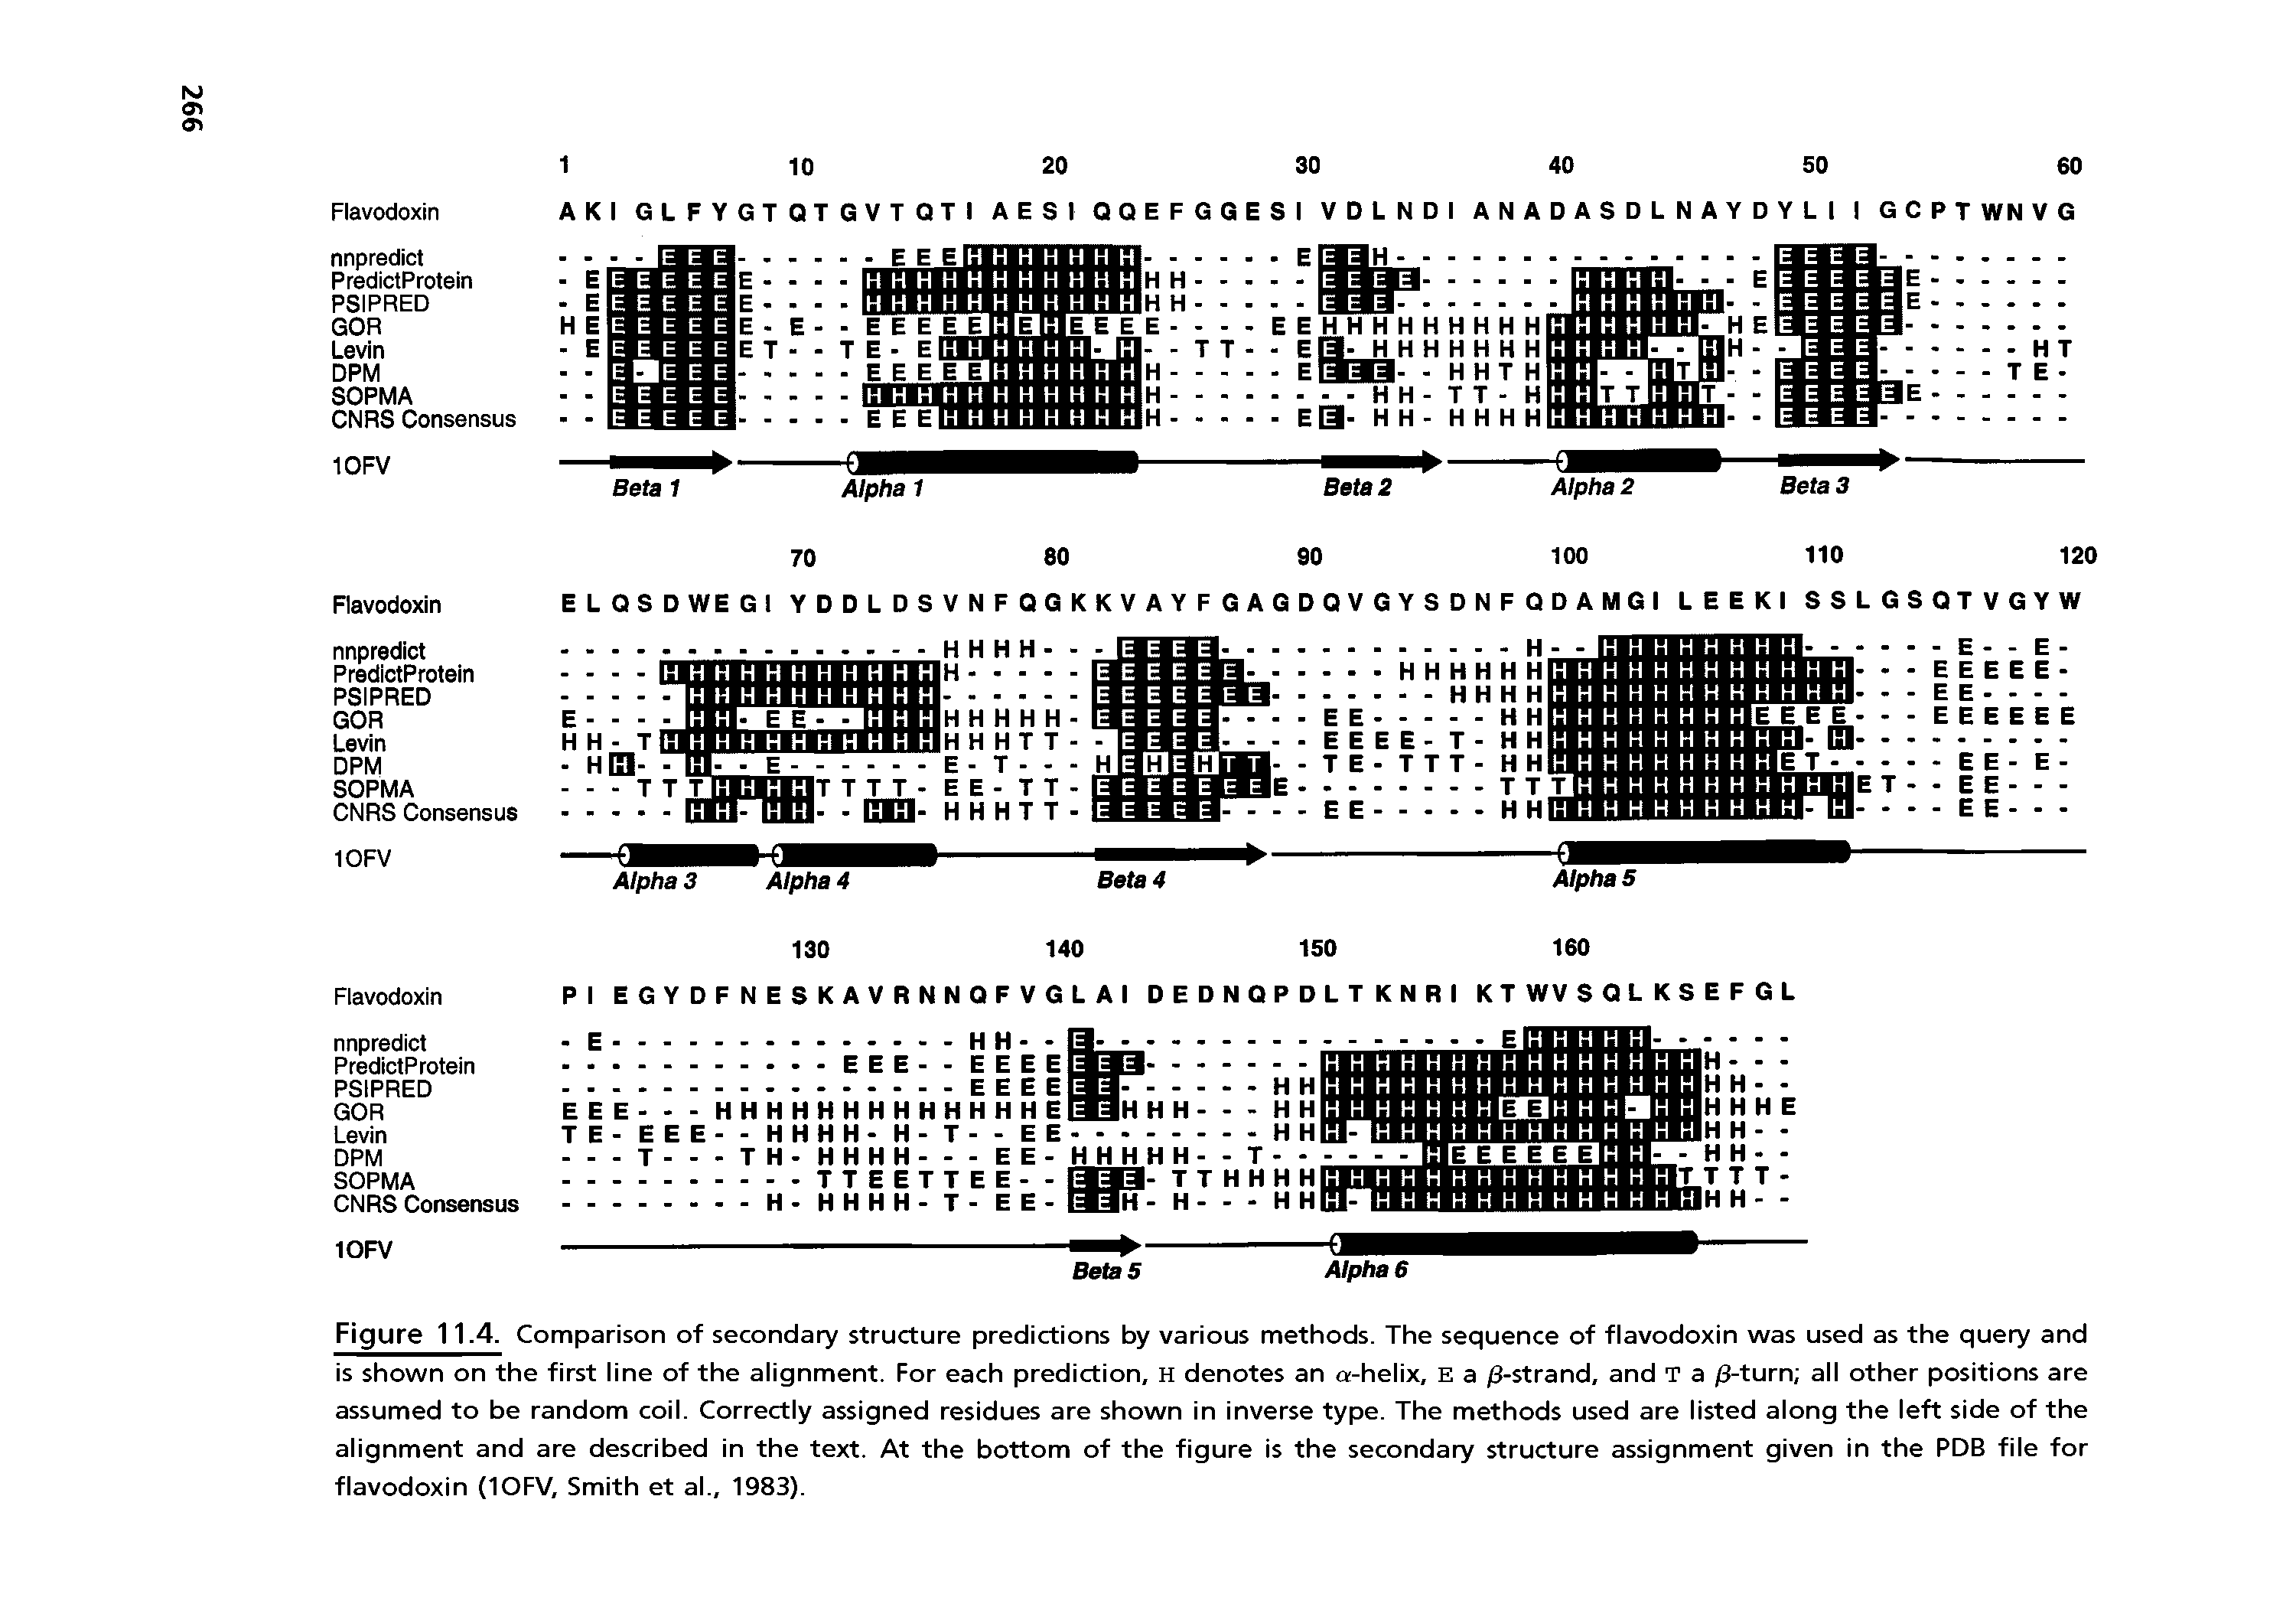 Figure 11.4. Comparison of secondary structure predictions by various methods. The sequence of flavodoxin was used as the query and is shown on the first line of the alignment. For each prediction, H denotes an a-helix, E a 3-strand, and T a 3-turn all other positions are assumed to be random coil. Correctly assigned residues are shown in inverse type. The methods used are listed along the left side of the alignment and are described in the text. At the bottom of the figure is the secondary structure assignment given in the PDB file for flavodoxin (10FV, Smith et al., 1983).